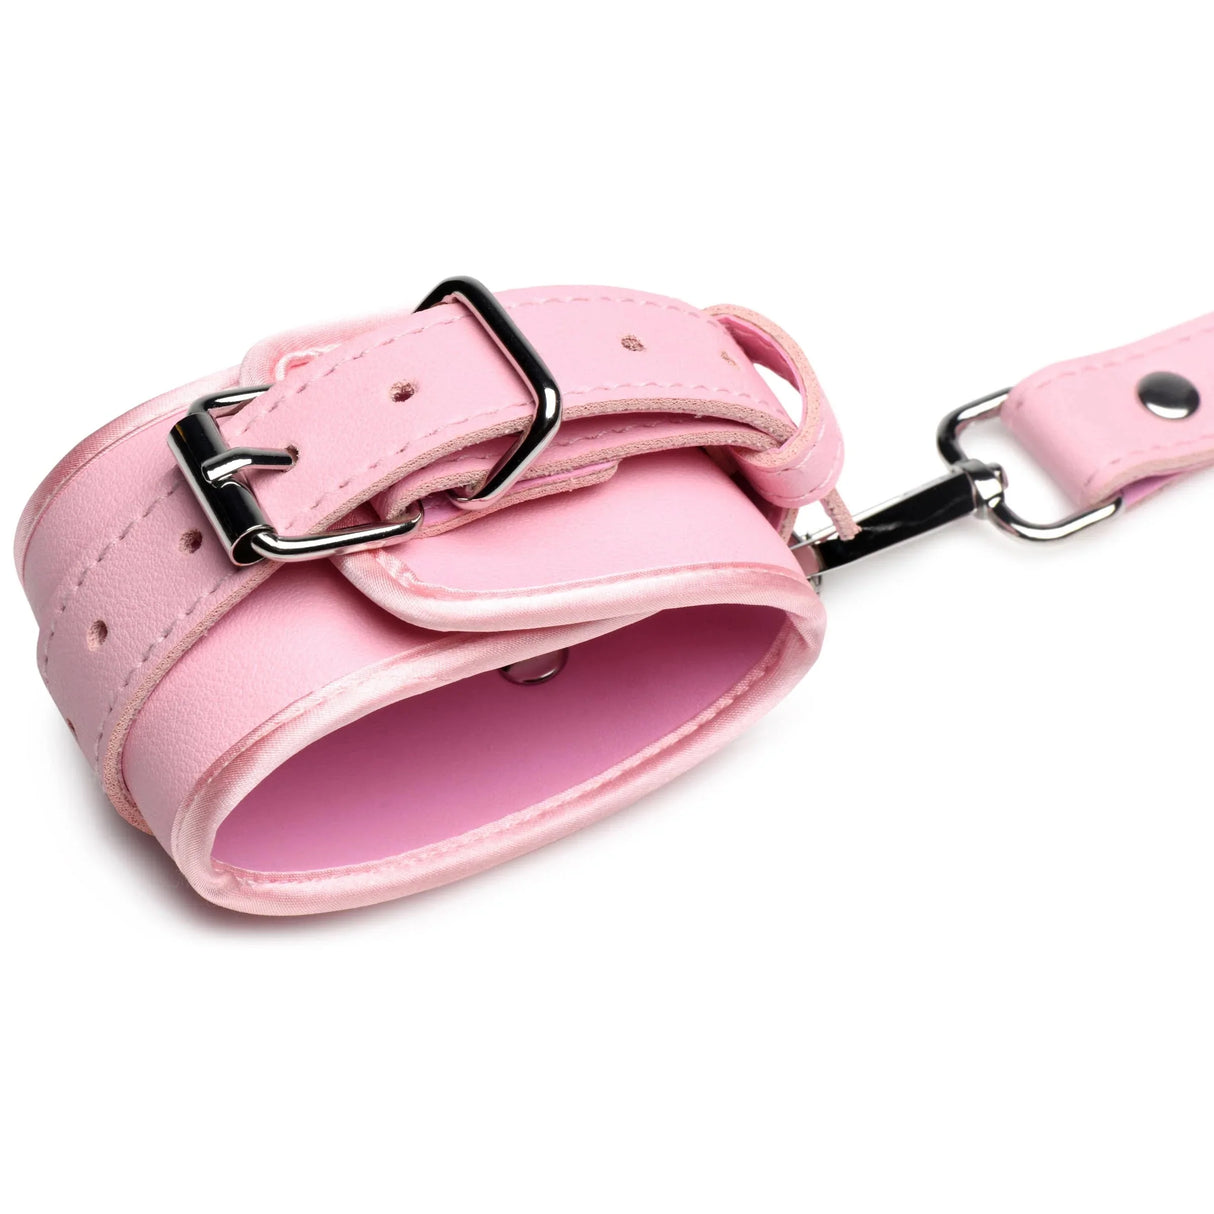 Strict Bondage Thigh Harness with Bows - Pink